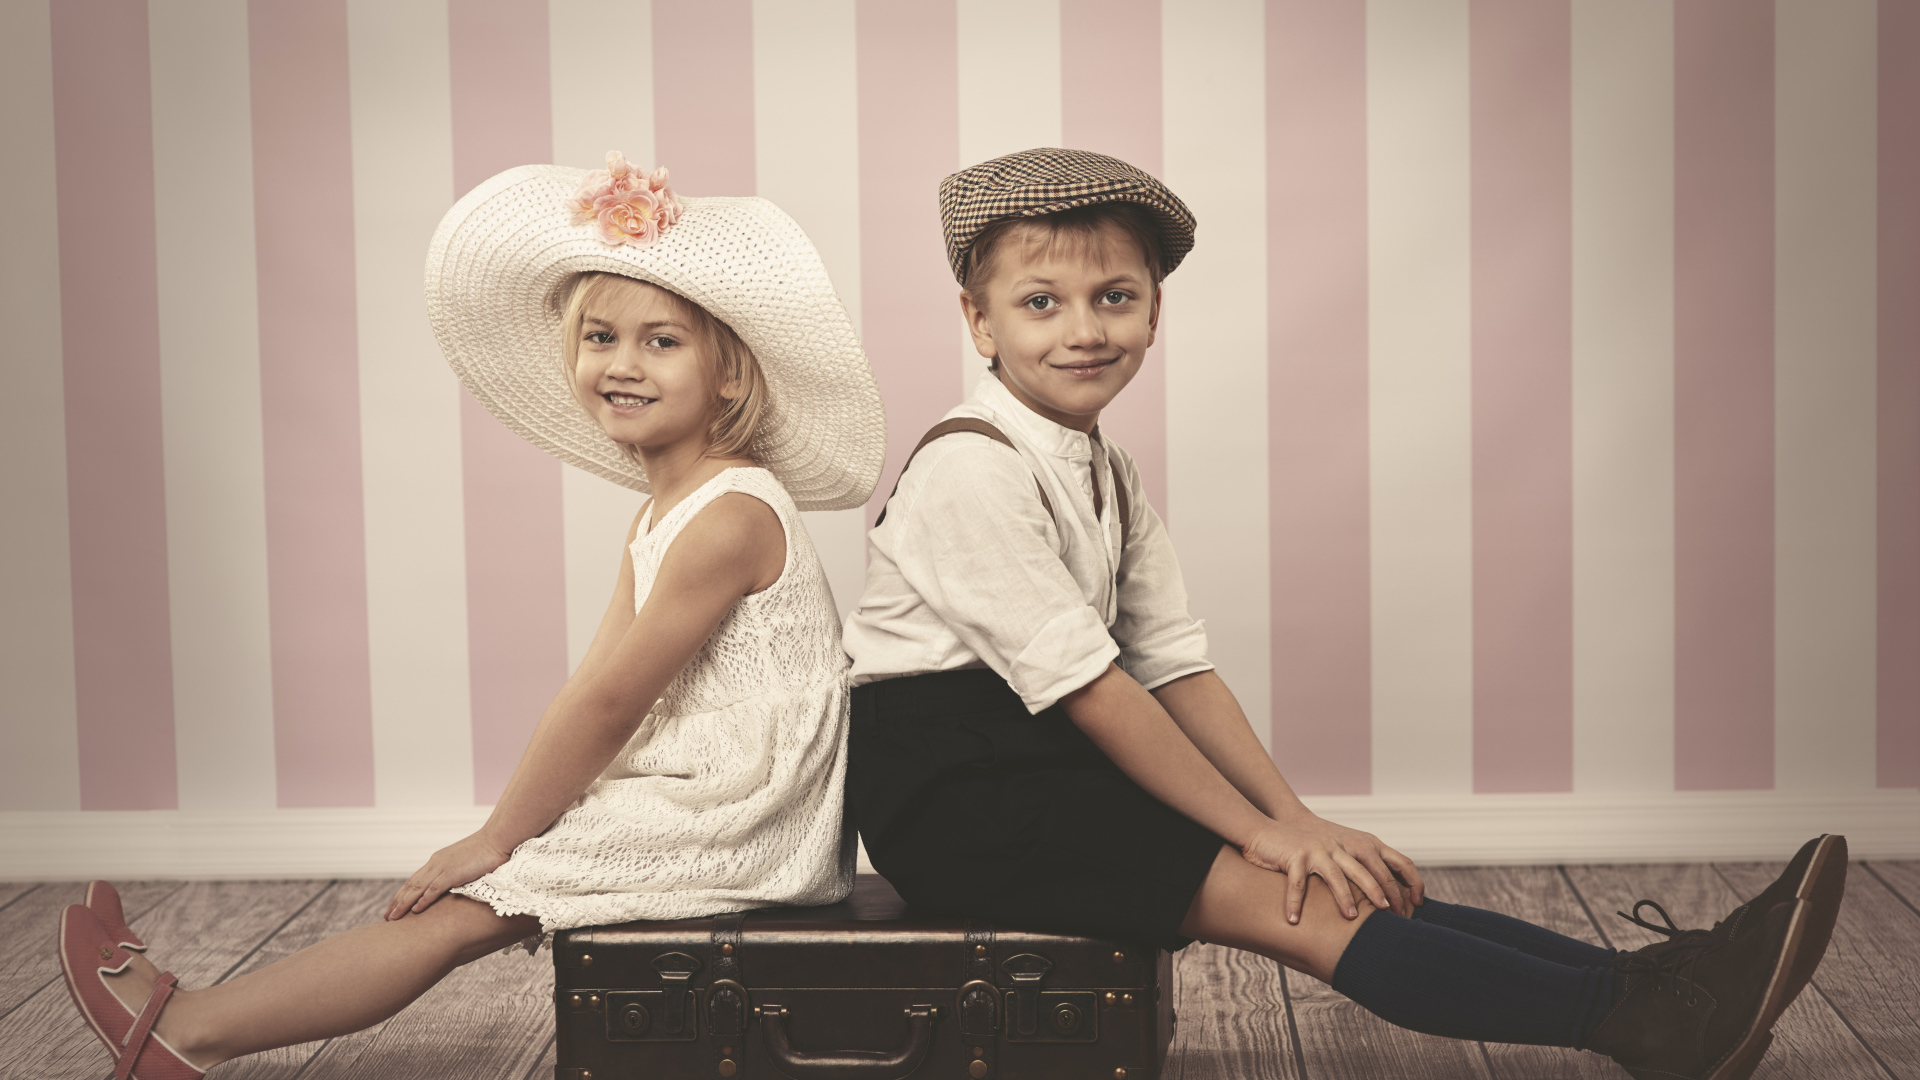 A girl in a big white hat and a boy are sitting on a suitcase